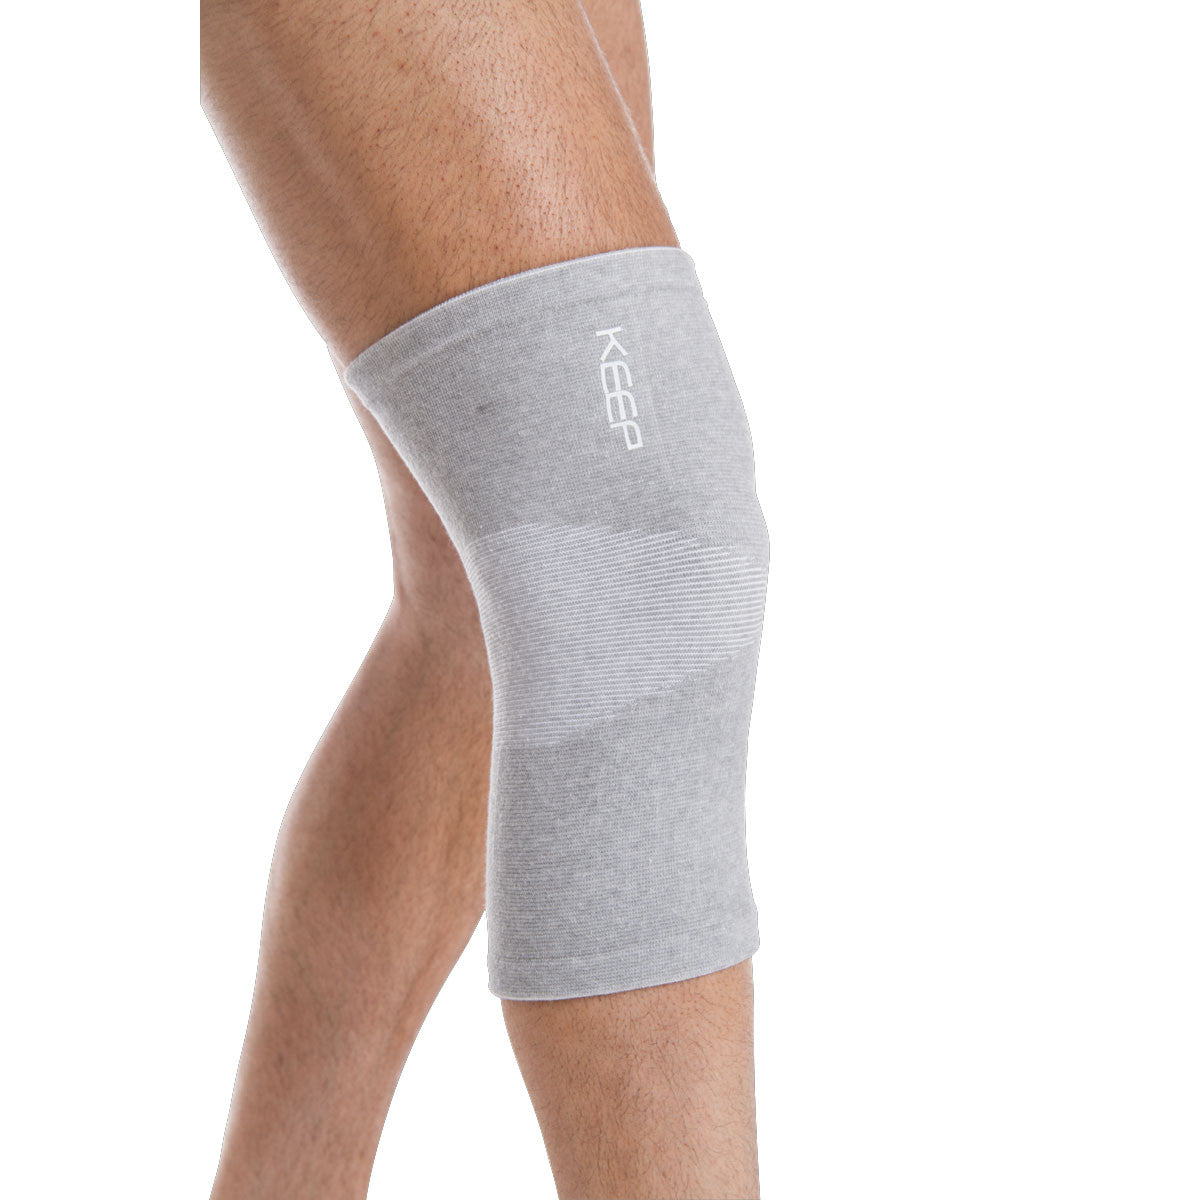 Total Knee Support - L/XL